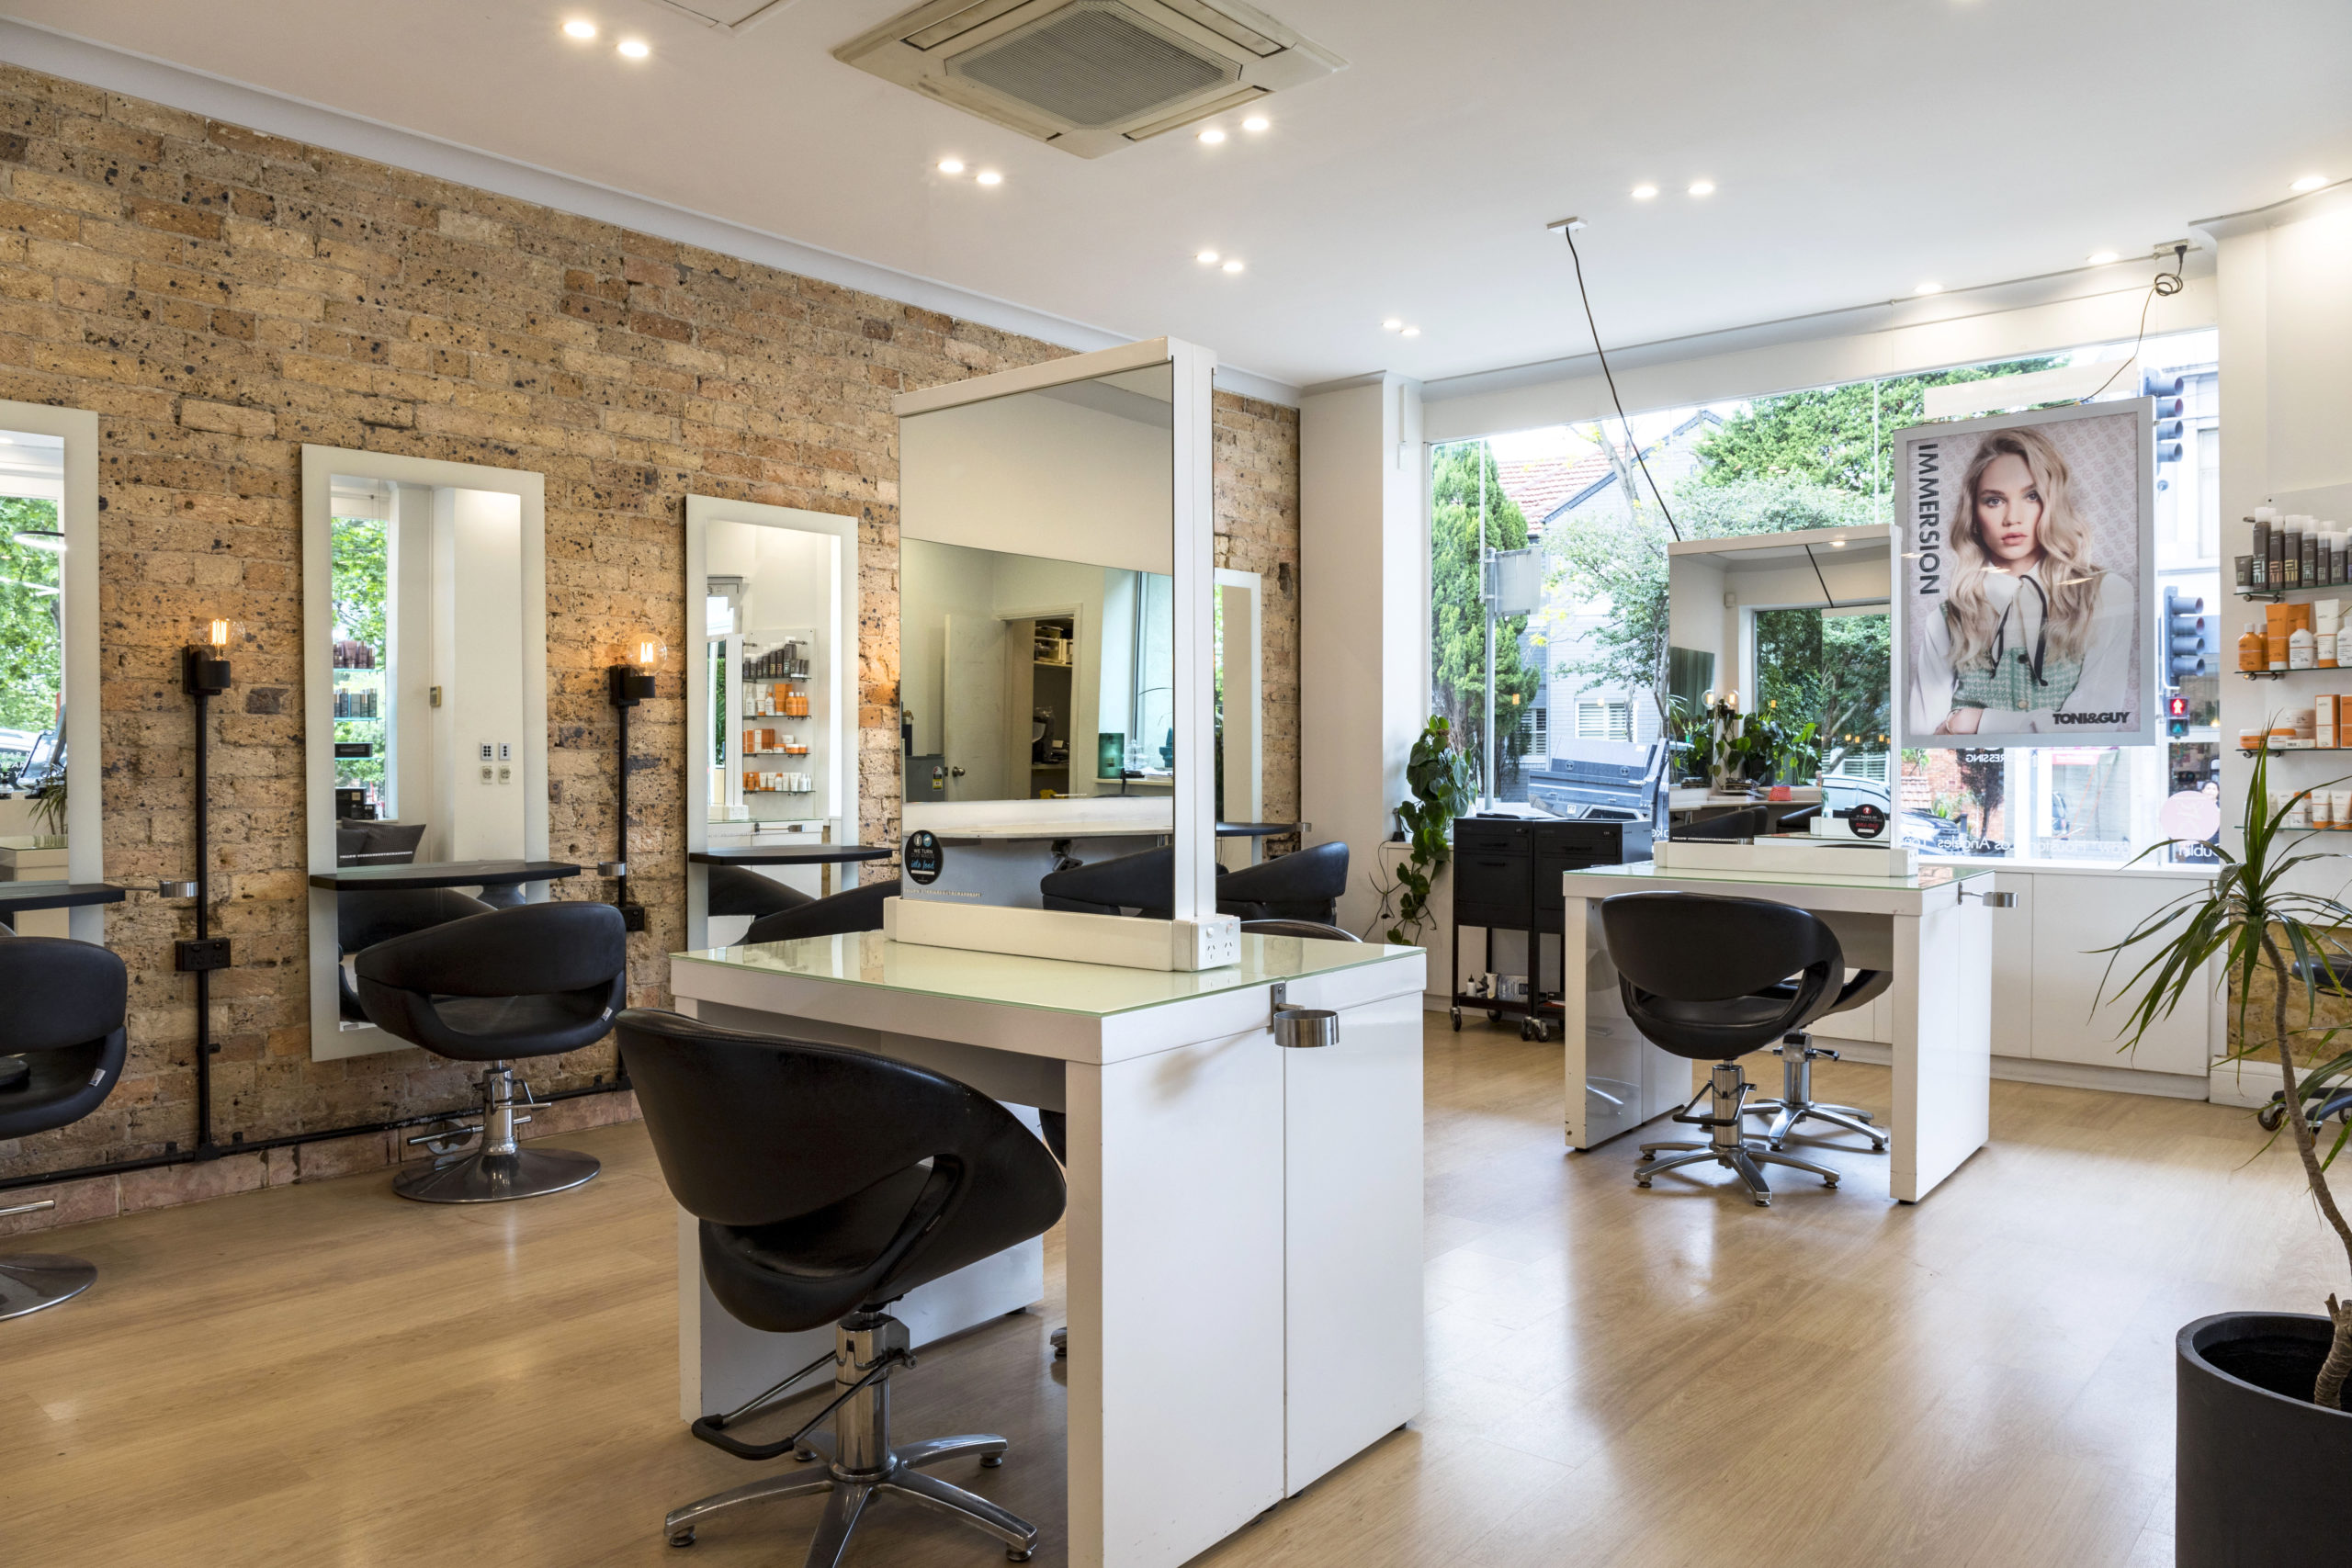 McMahons Point Hair Salon - Find the best hairdresser near you | TONI&GUY